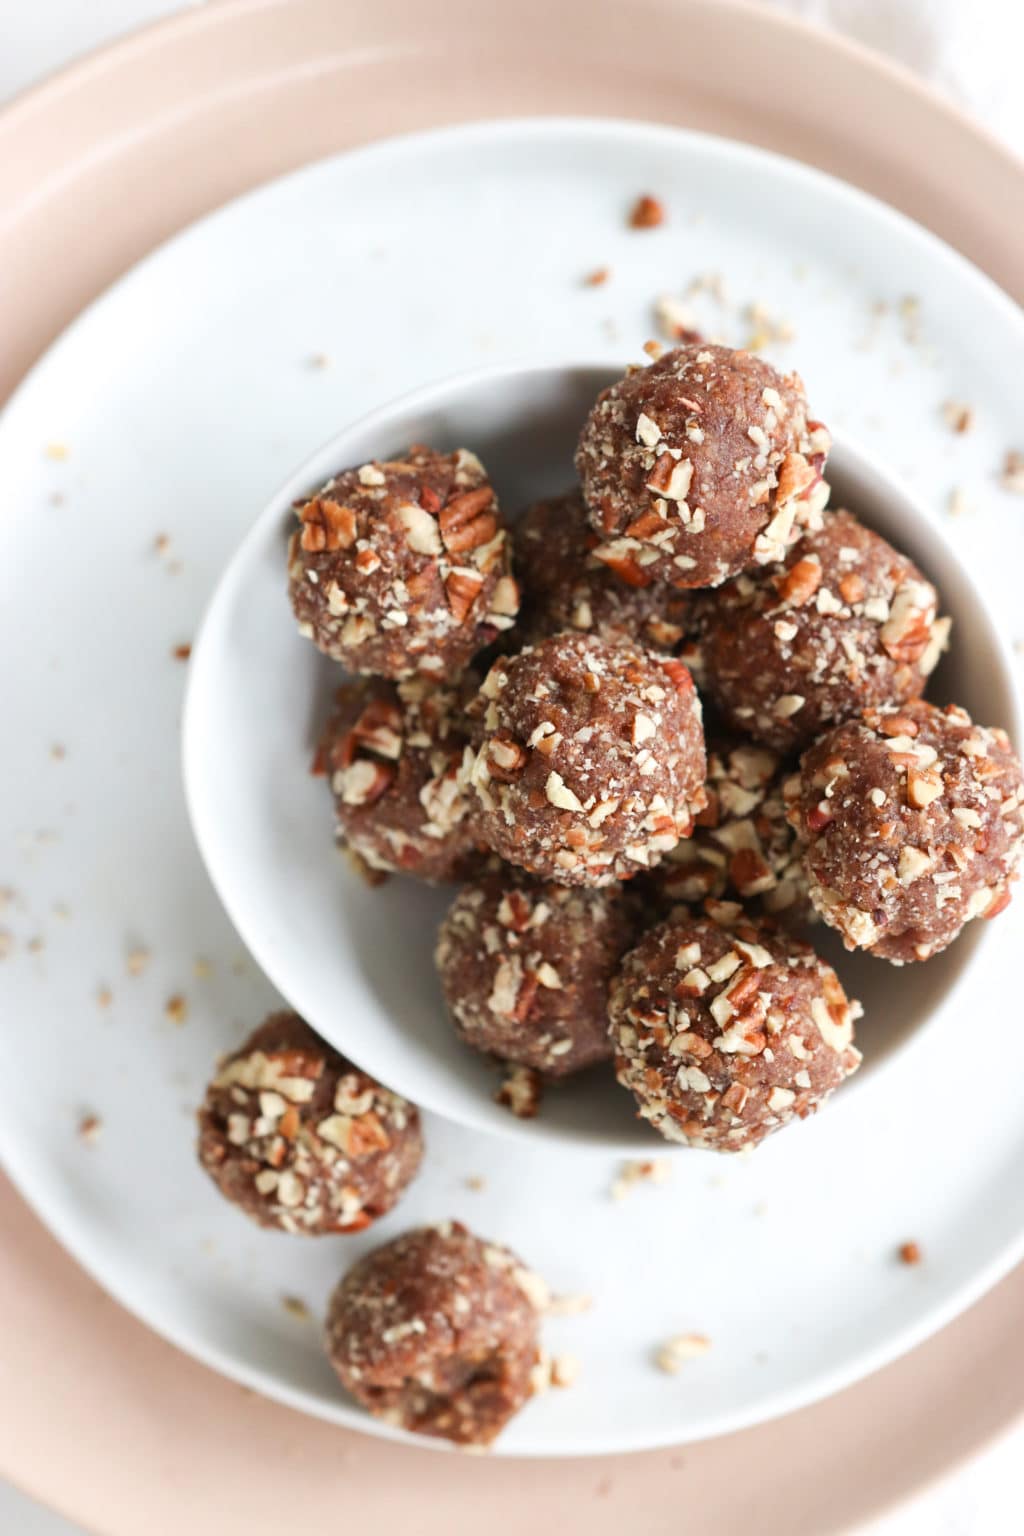 Pecan Pie Energy Balls in a bowl over a pink and white plate. Ingredients include: pecans, dates, vanilla, salt, cinnamon.